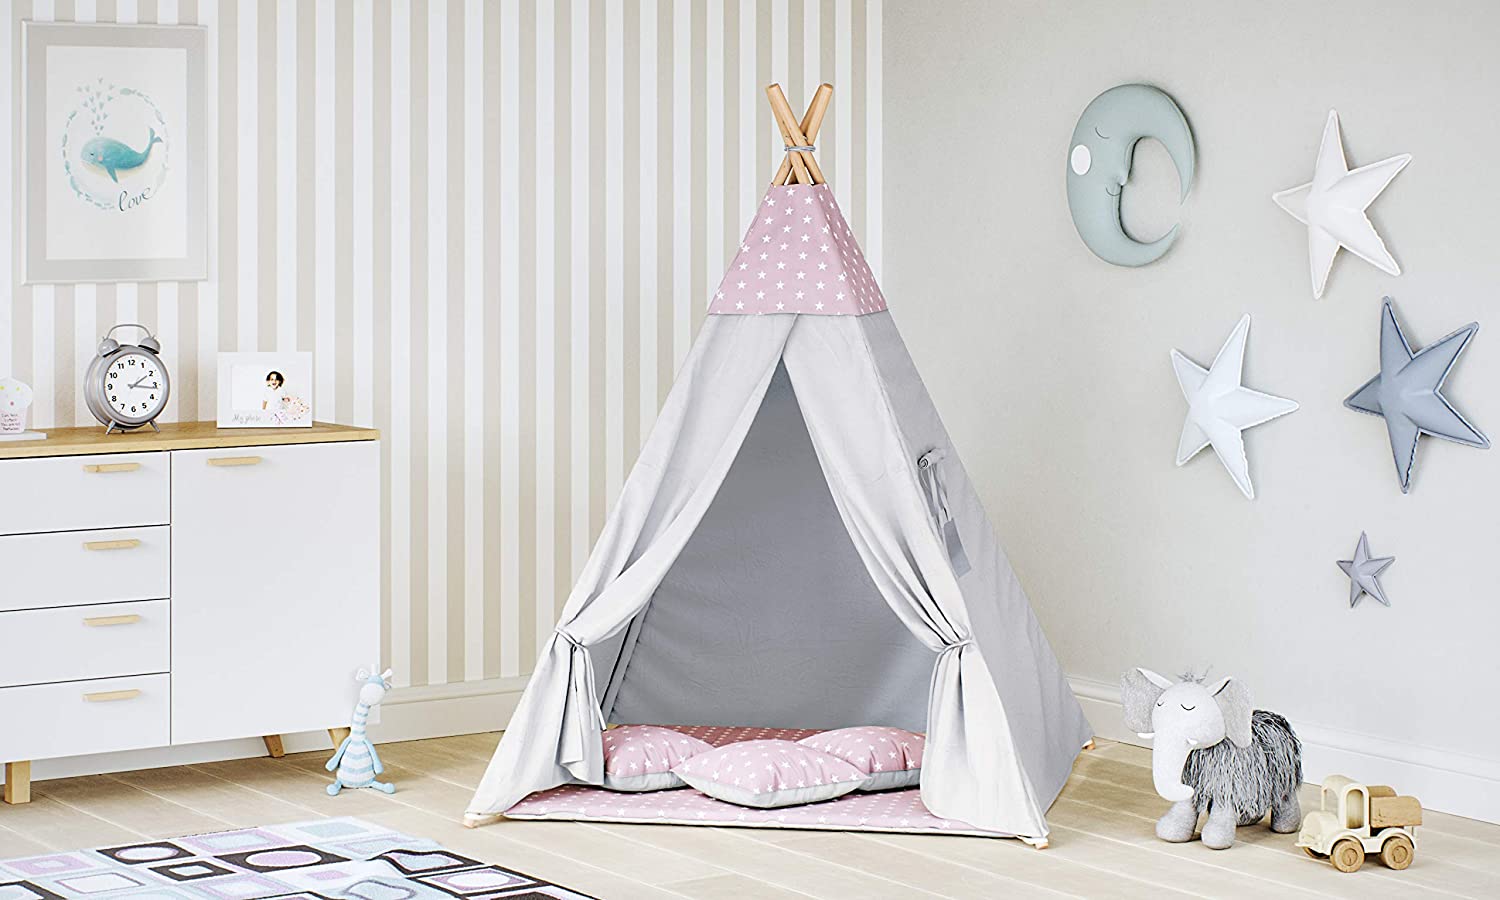 Malatec 8702 Teepee Tent For Children Play Tent Indian Cotton 3 Cushions, C